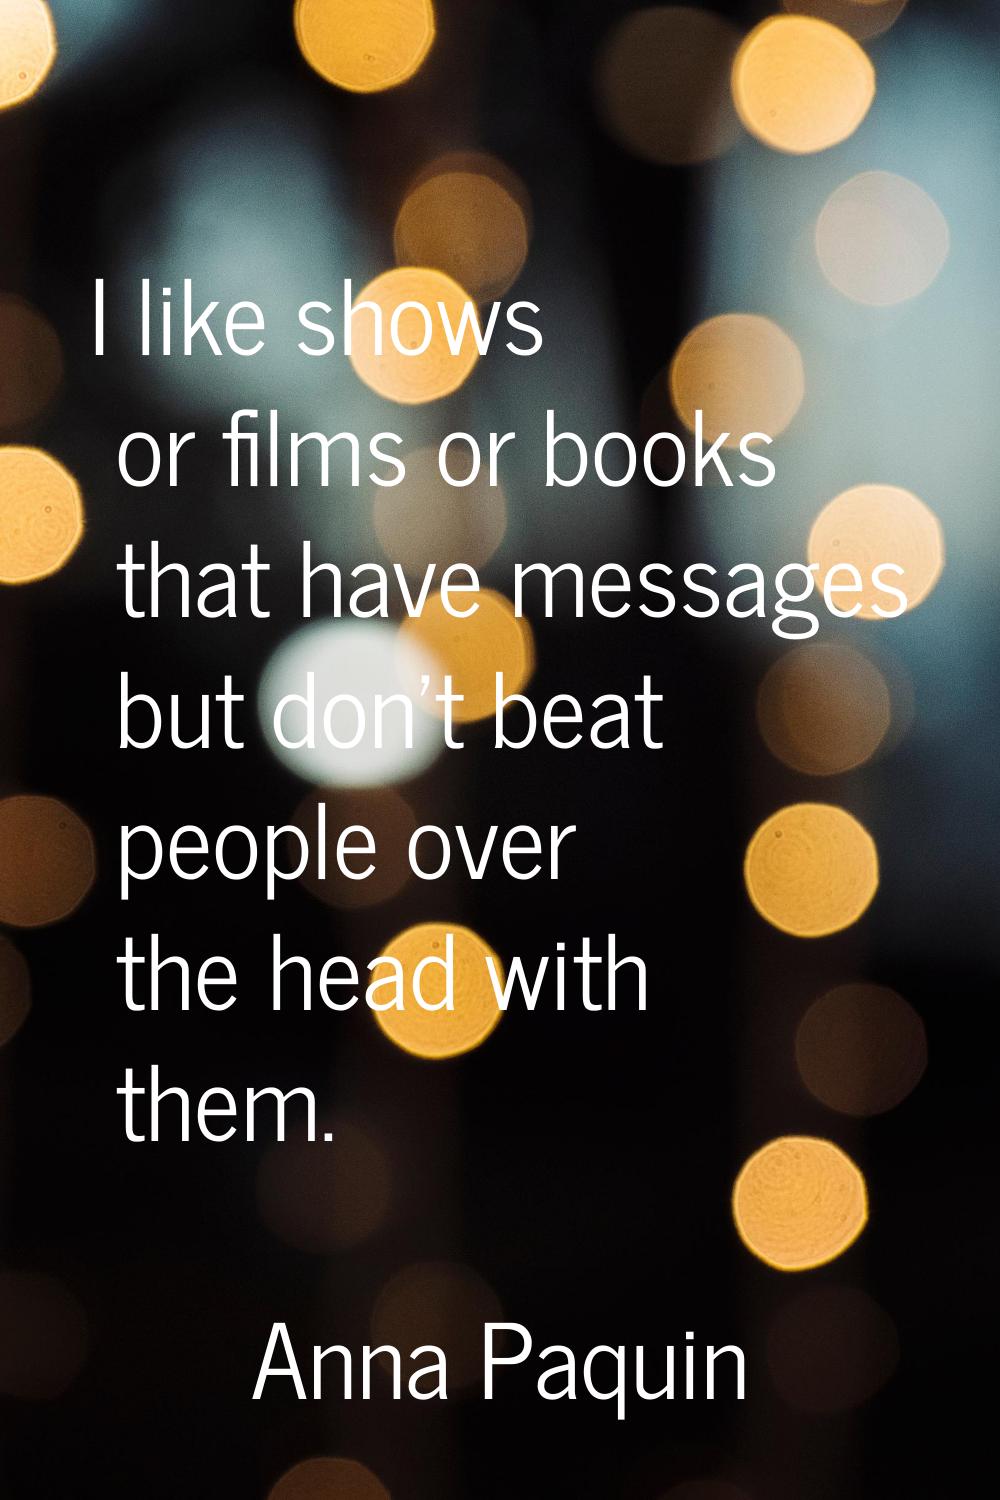 I like shows or films or books that have messages but don't beat people over the head with them.